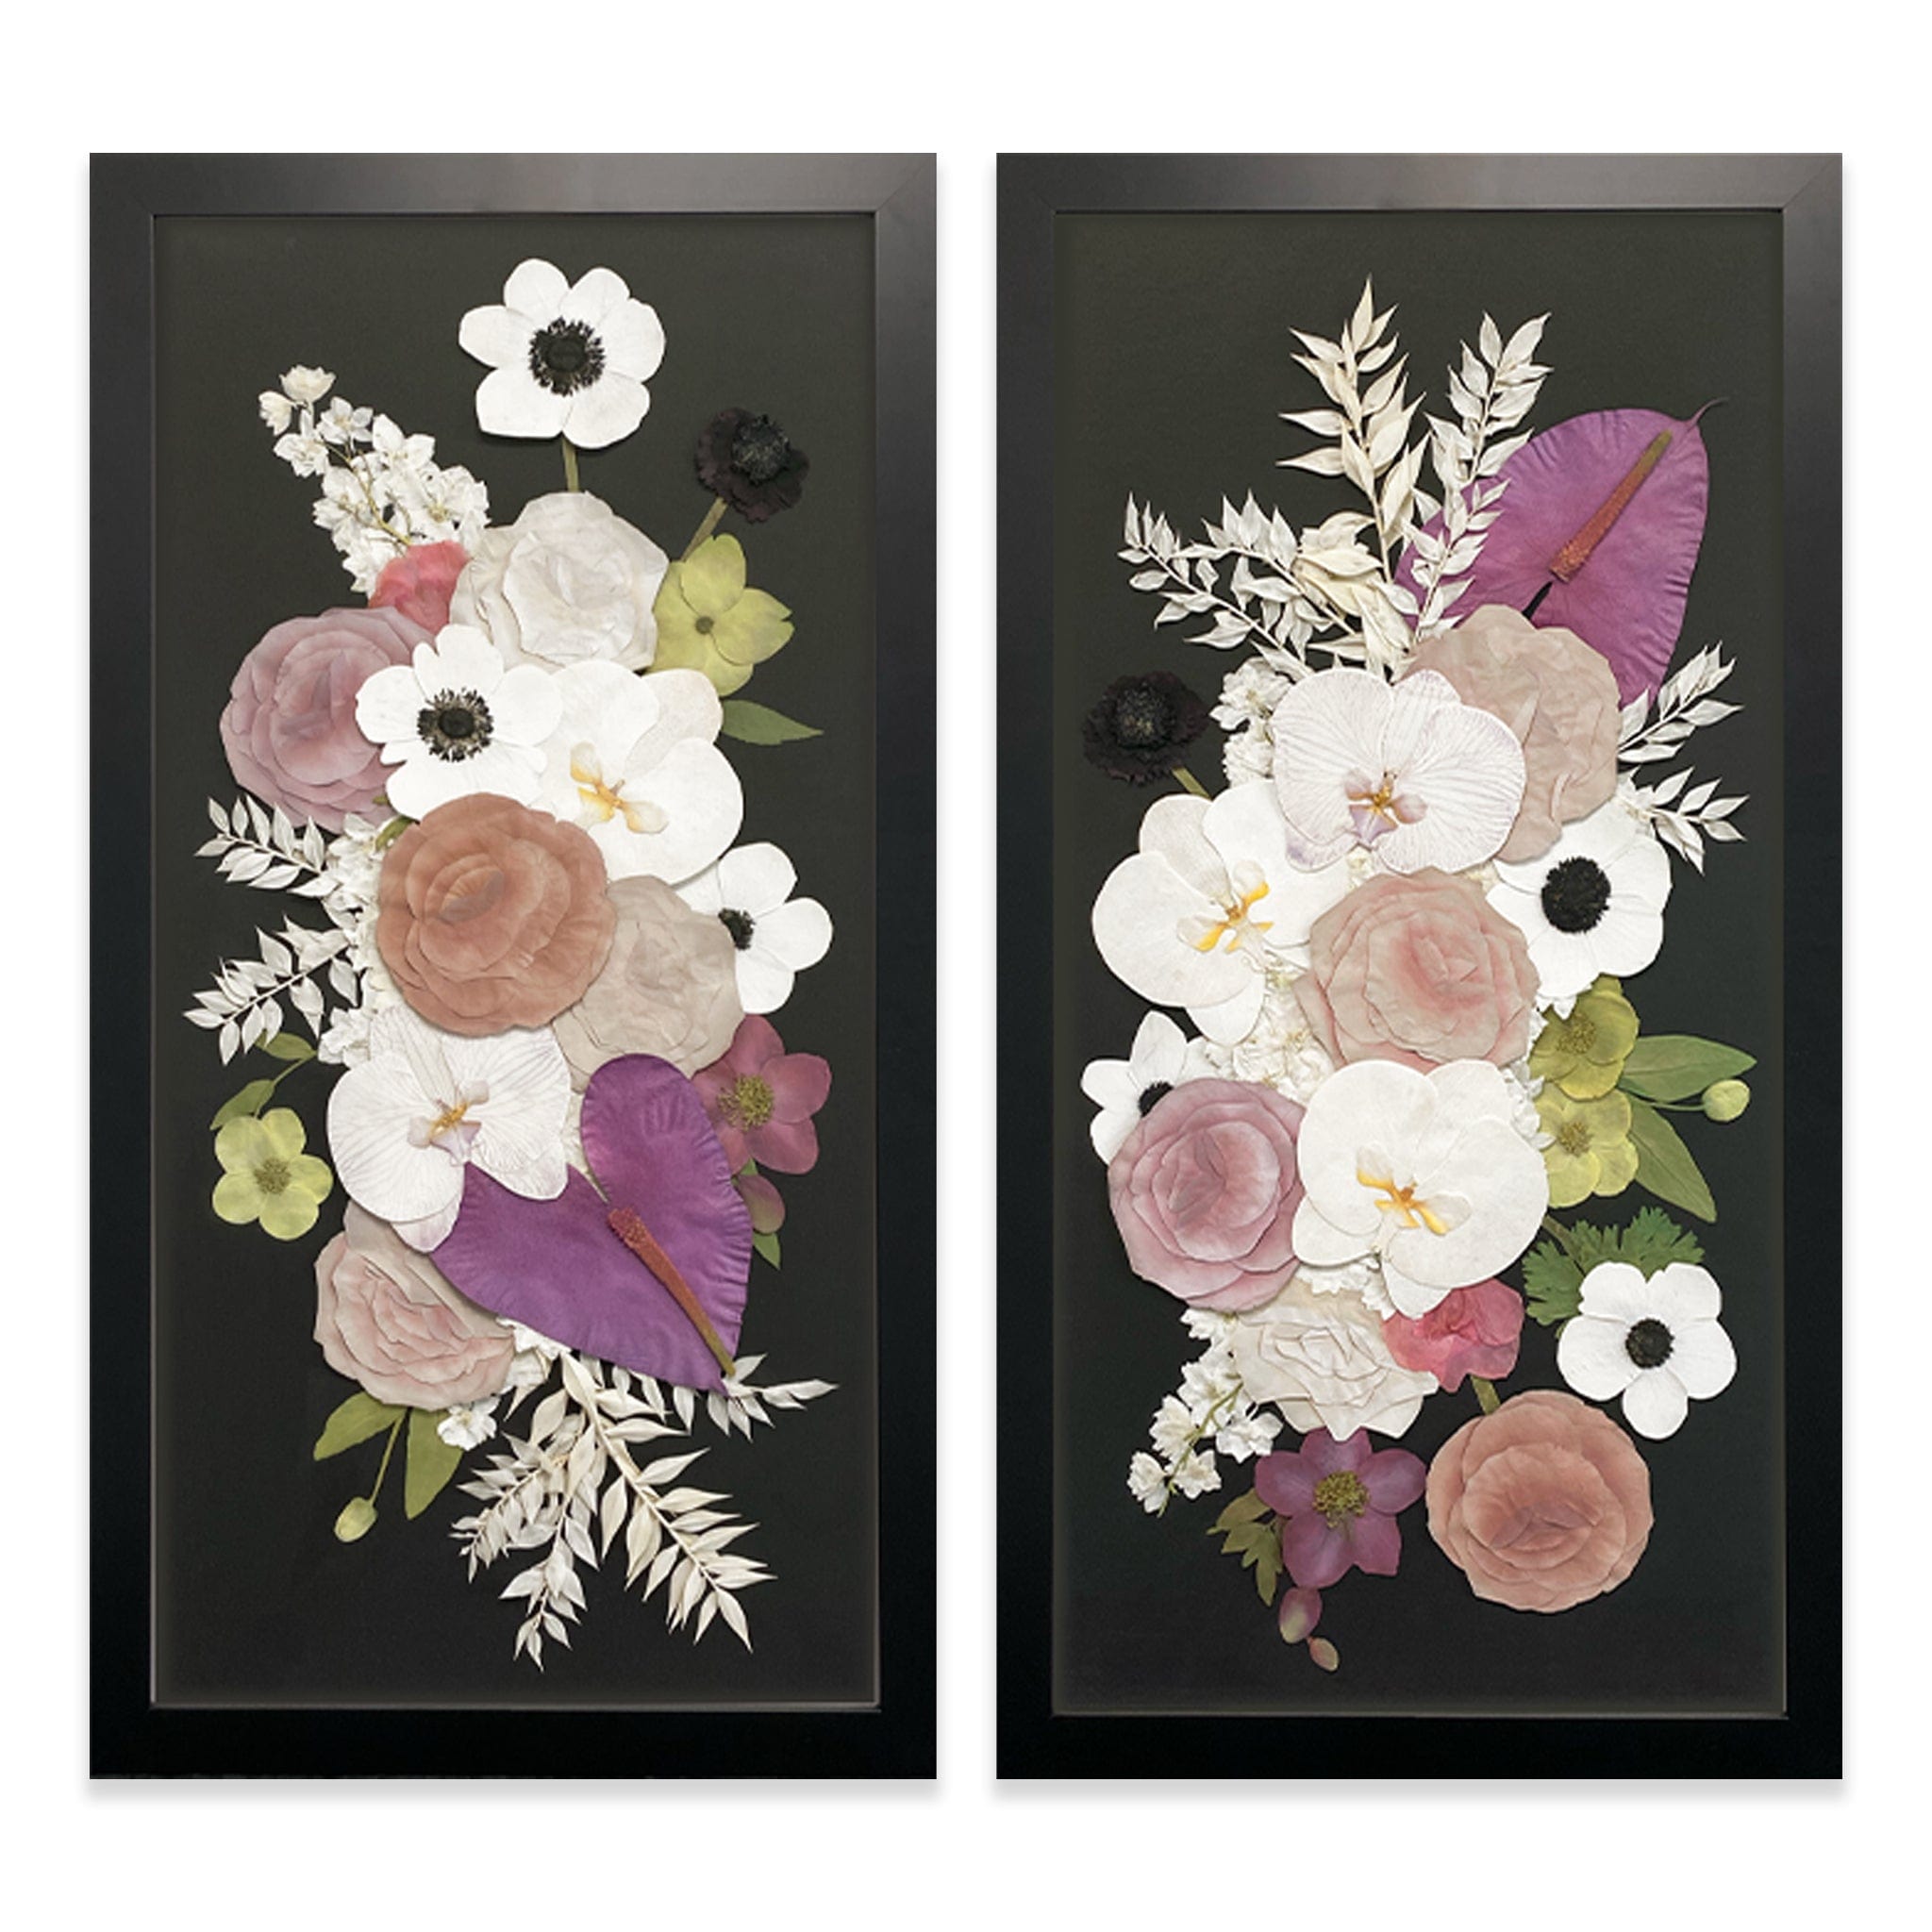 Designs by Andrea Pressed (Framed) 12" x 24" / Rectangle / Panel 12" x 24" Duo Panels Classic Frames